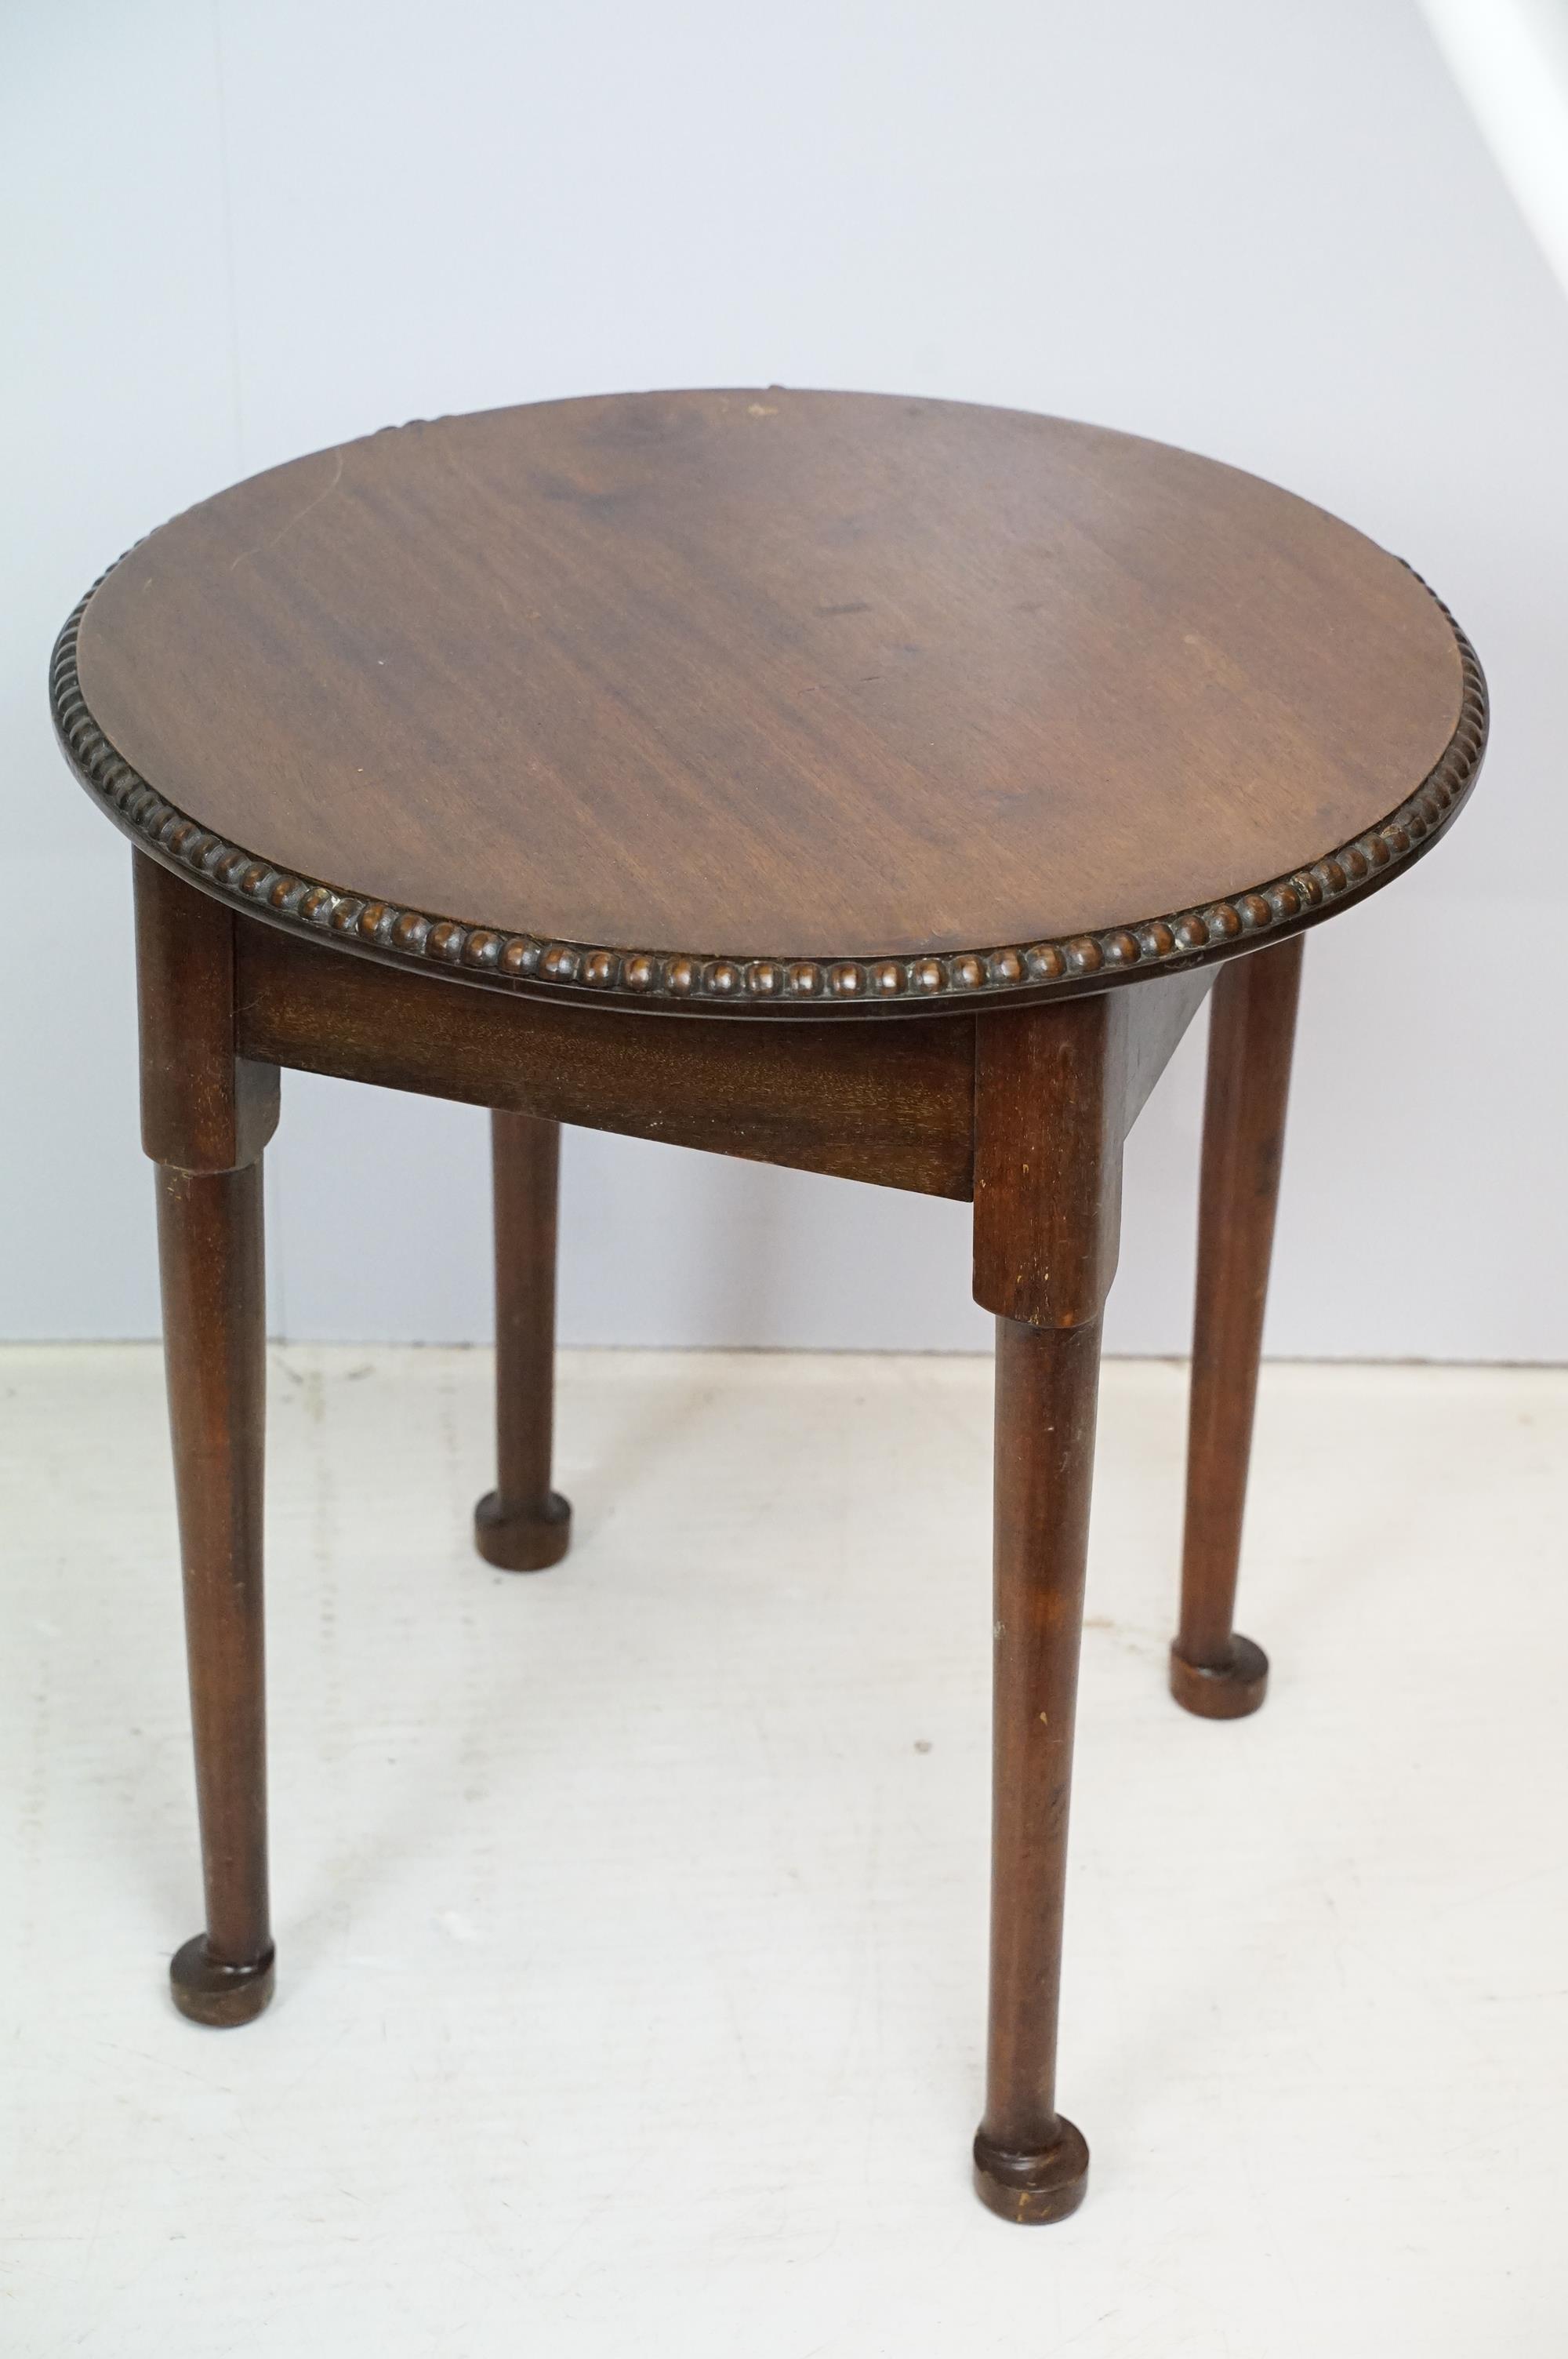 Early 20th Century oak side table having a round top with reeded rim and turned legs. Measures 51